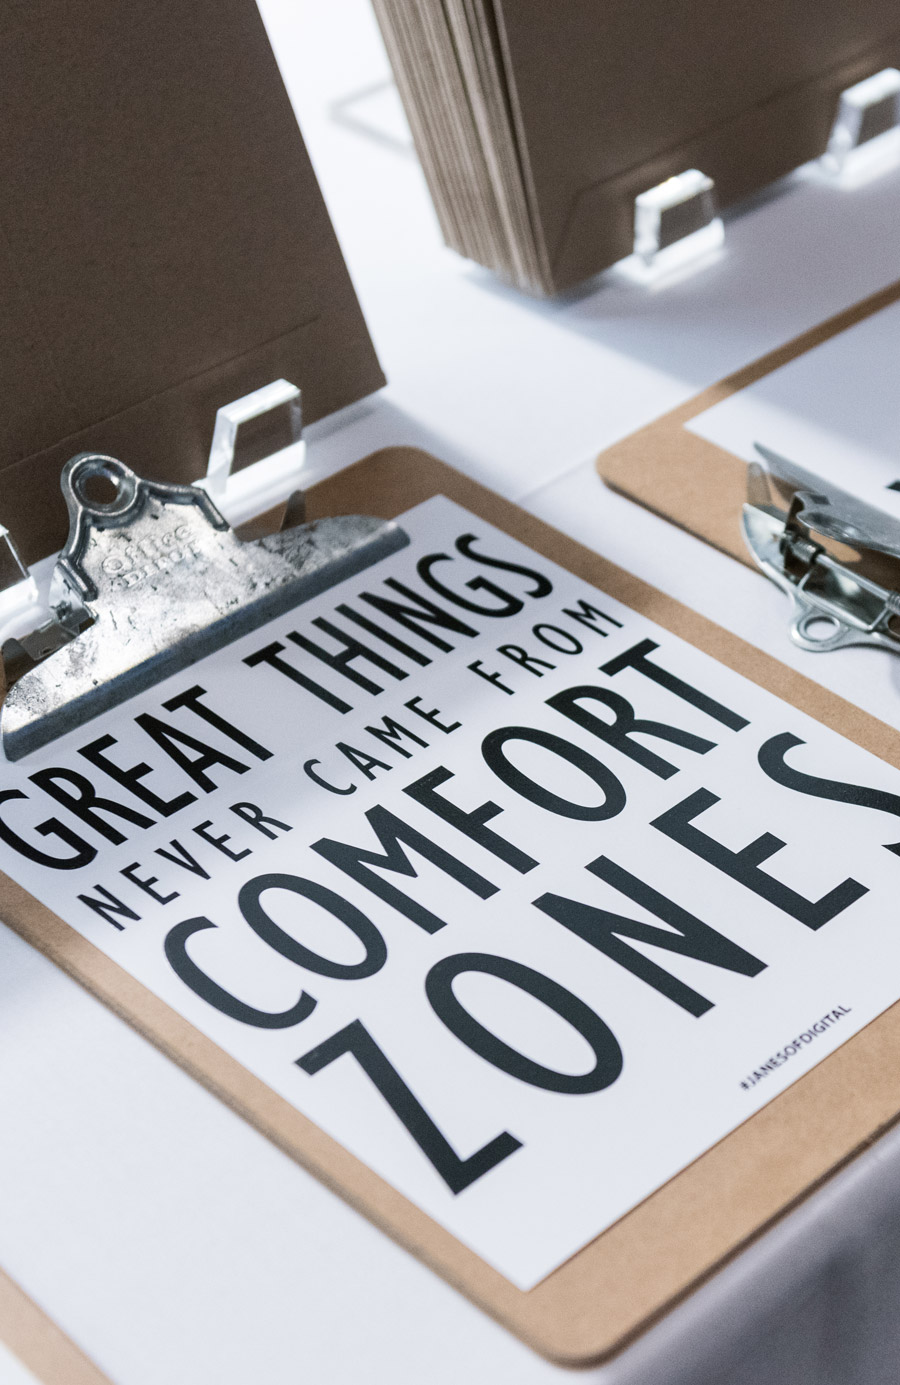 Clipboard with a piece of paper that says 'great things never came from comfort zones'.